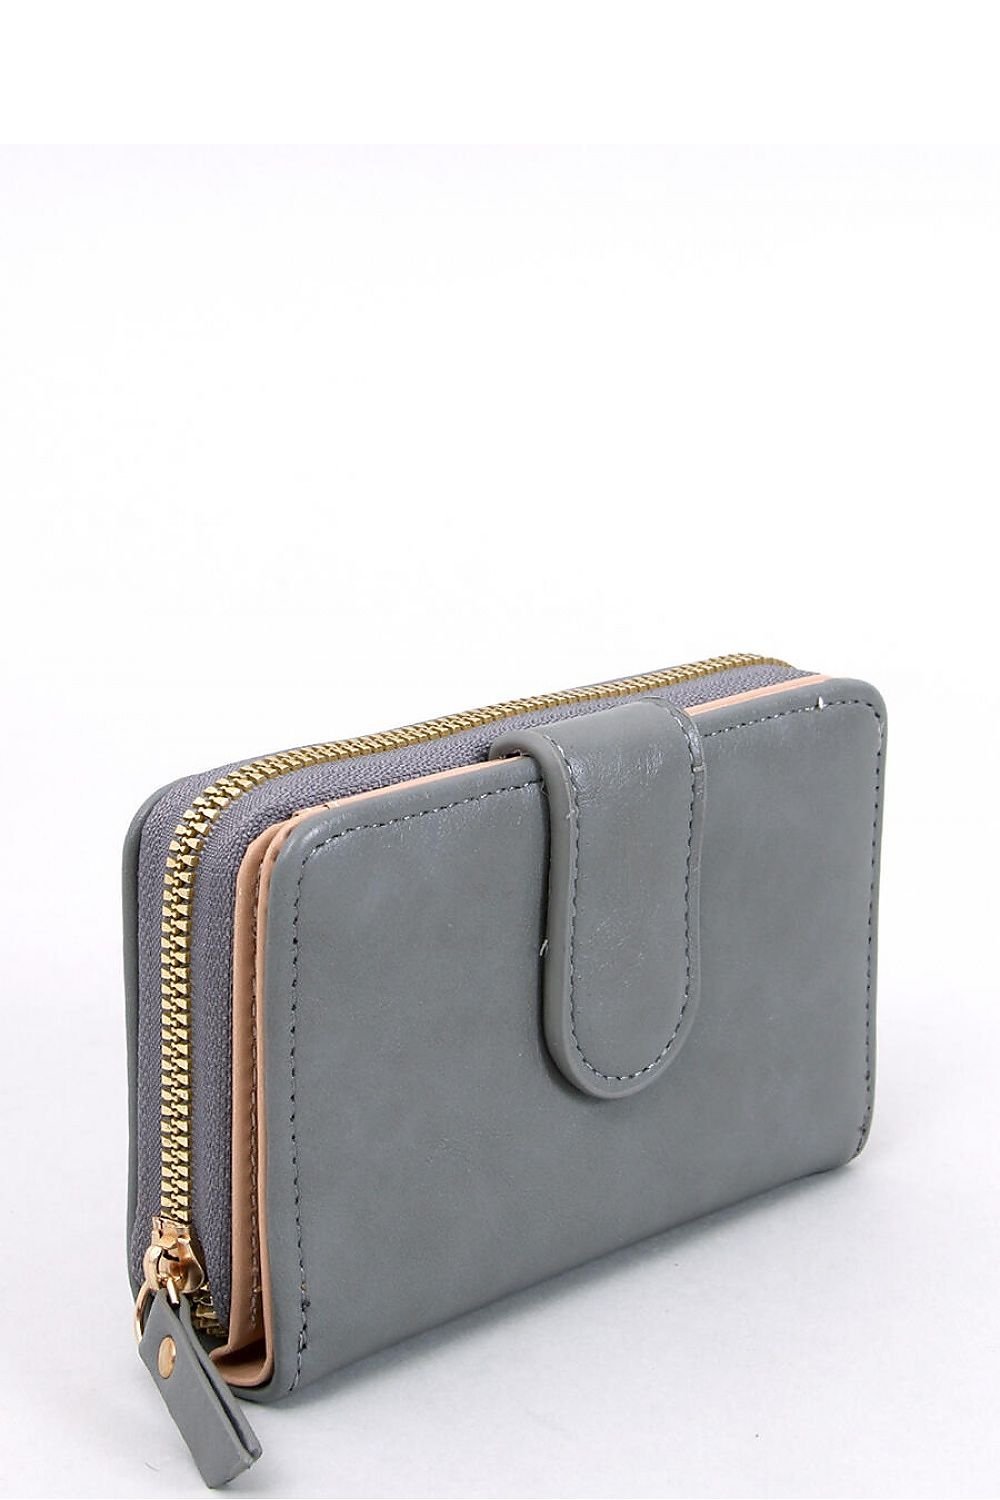 Women`s wallet - M&H FashionWomen`s walletM&H FashionM&H Fashion189654_1103912one-size-fits-allwallet InelloM&H FashionM&H FashionClassic women's wallet. This reliable model in unique colors will surely catch your eye : ) It will also be perfect as a gift.... Inside there are numerous compartmeWomen`s wallet